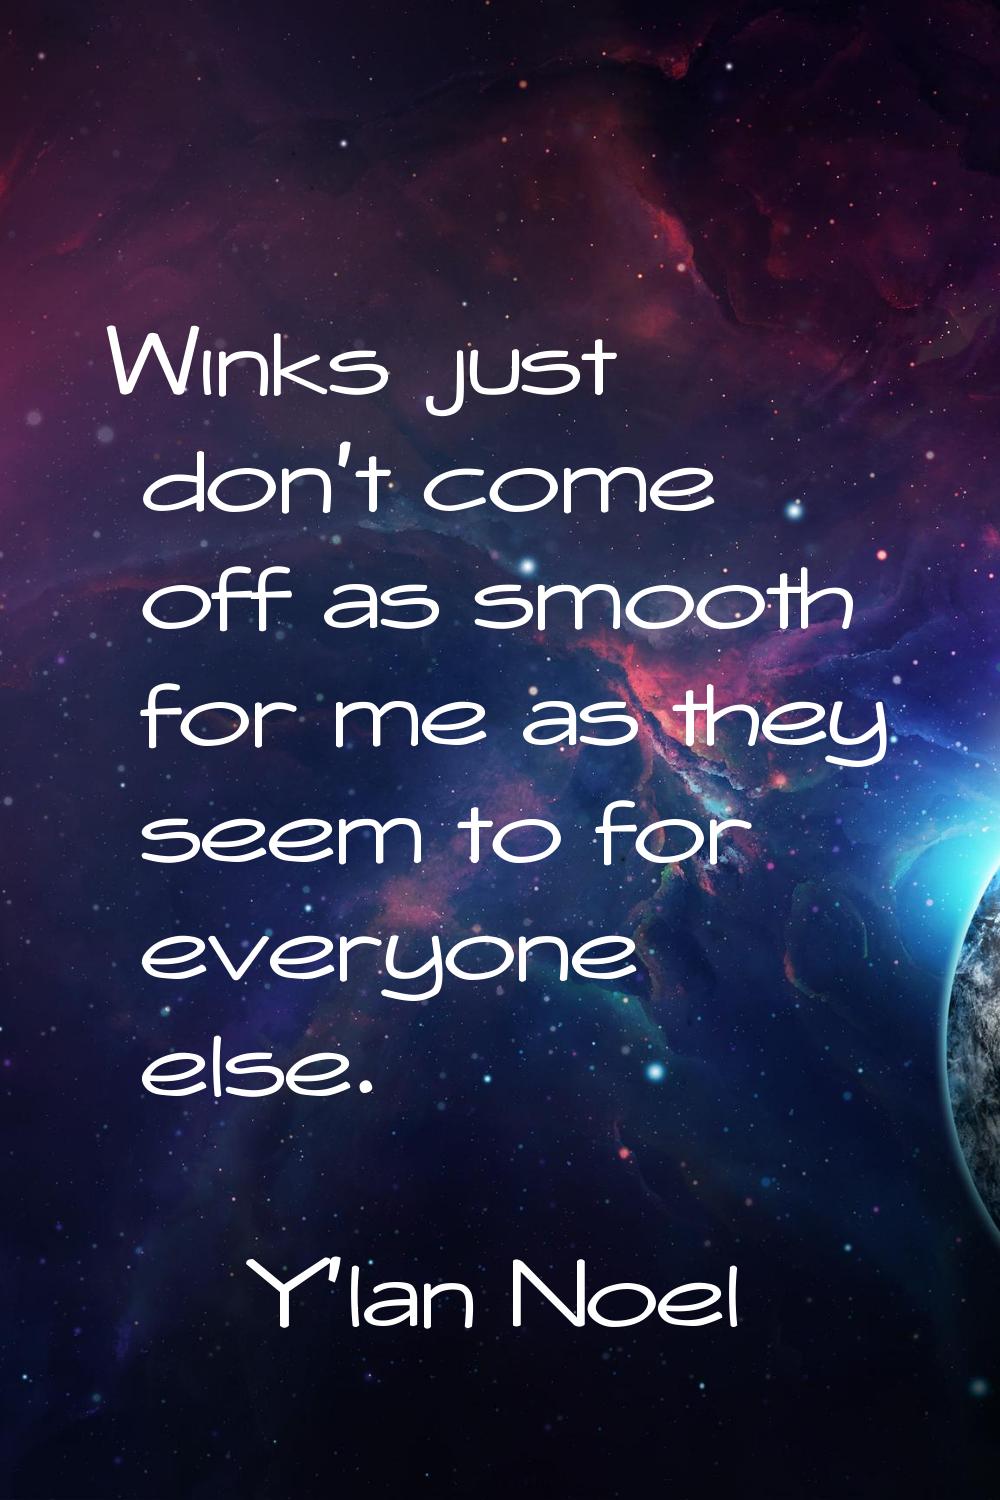 Winks just don't come off as smooth for me as they seem to for everyone else.